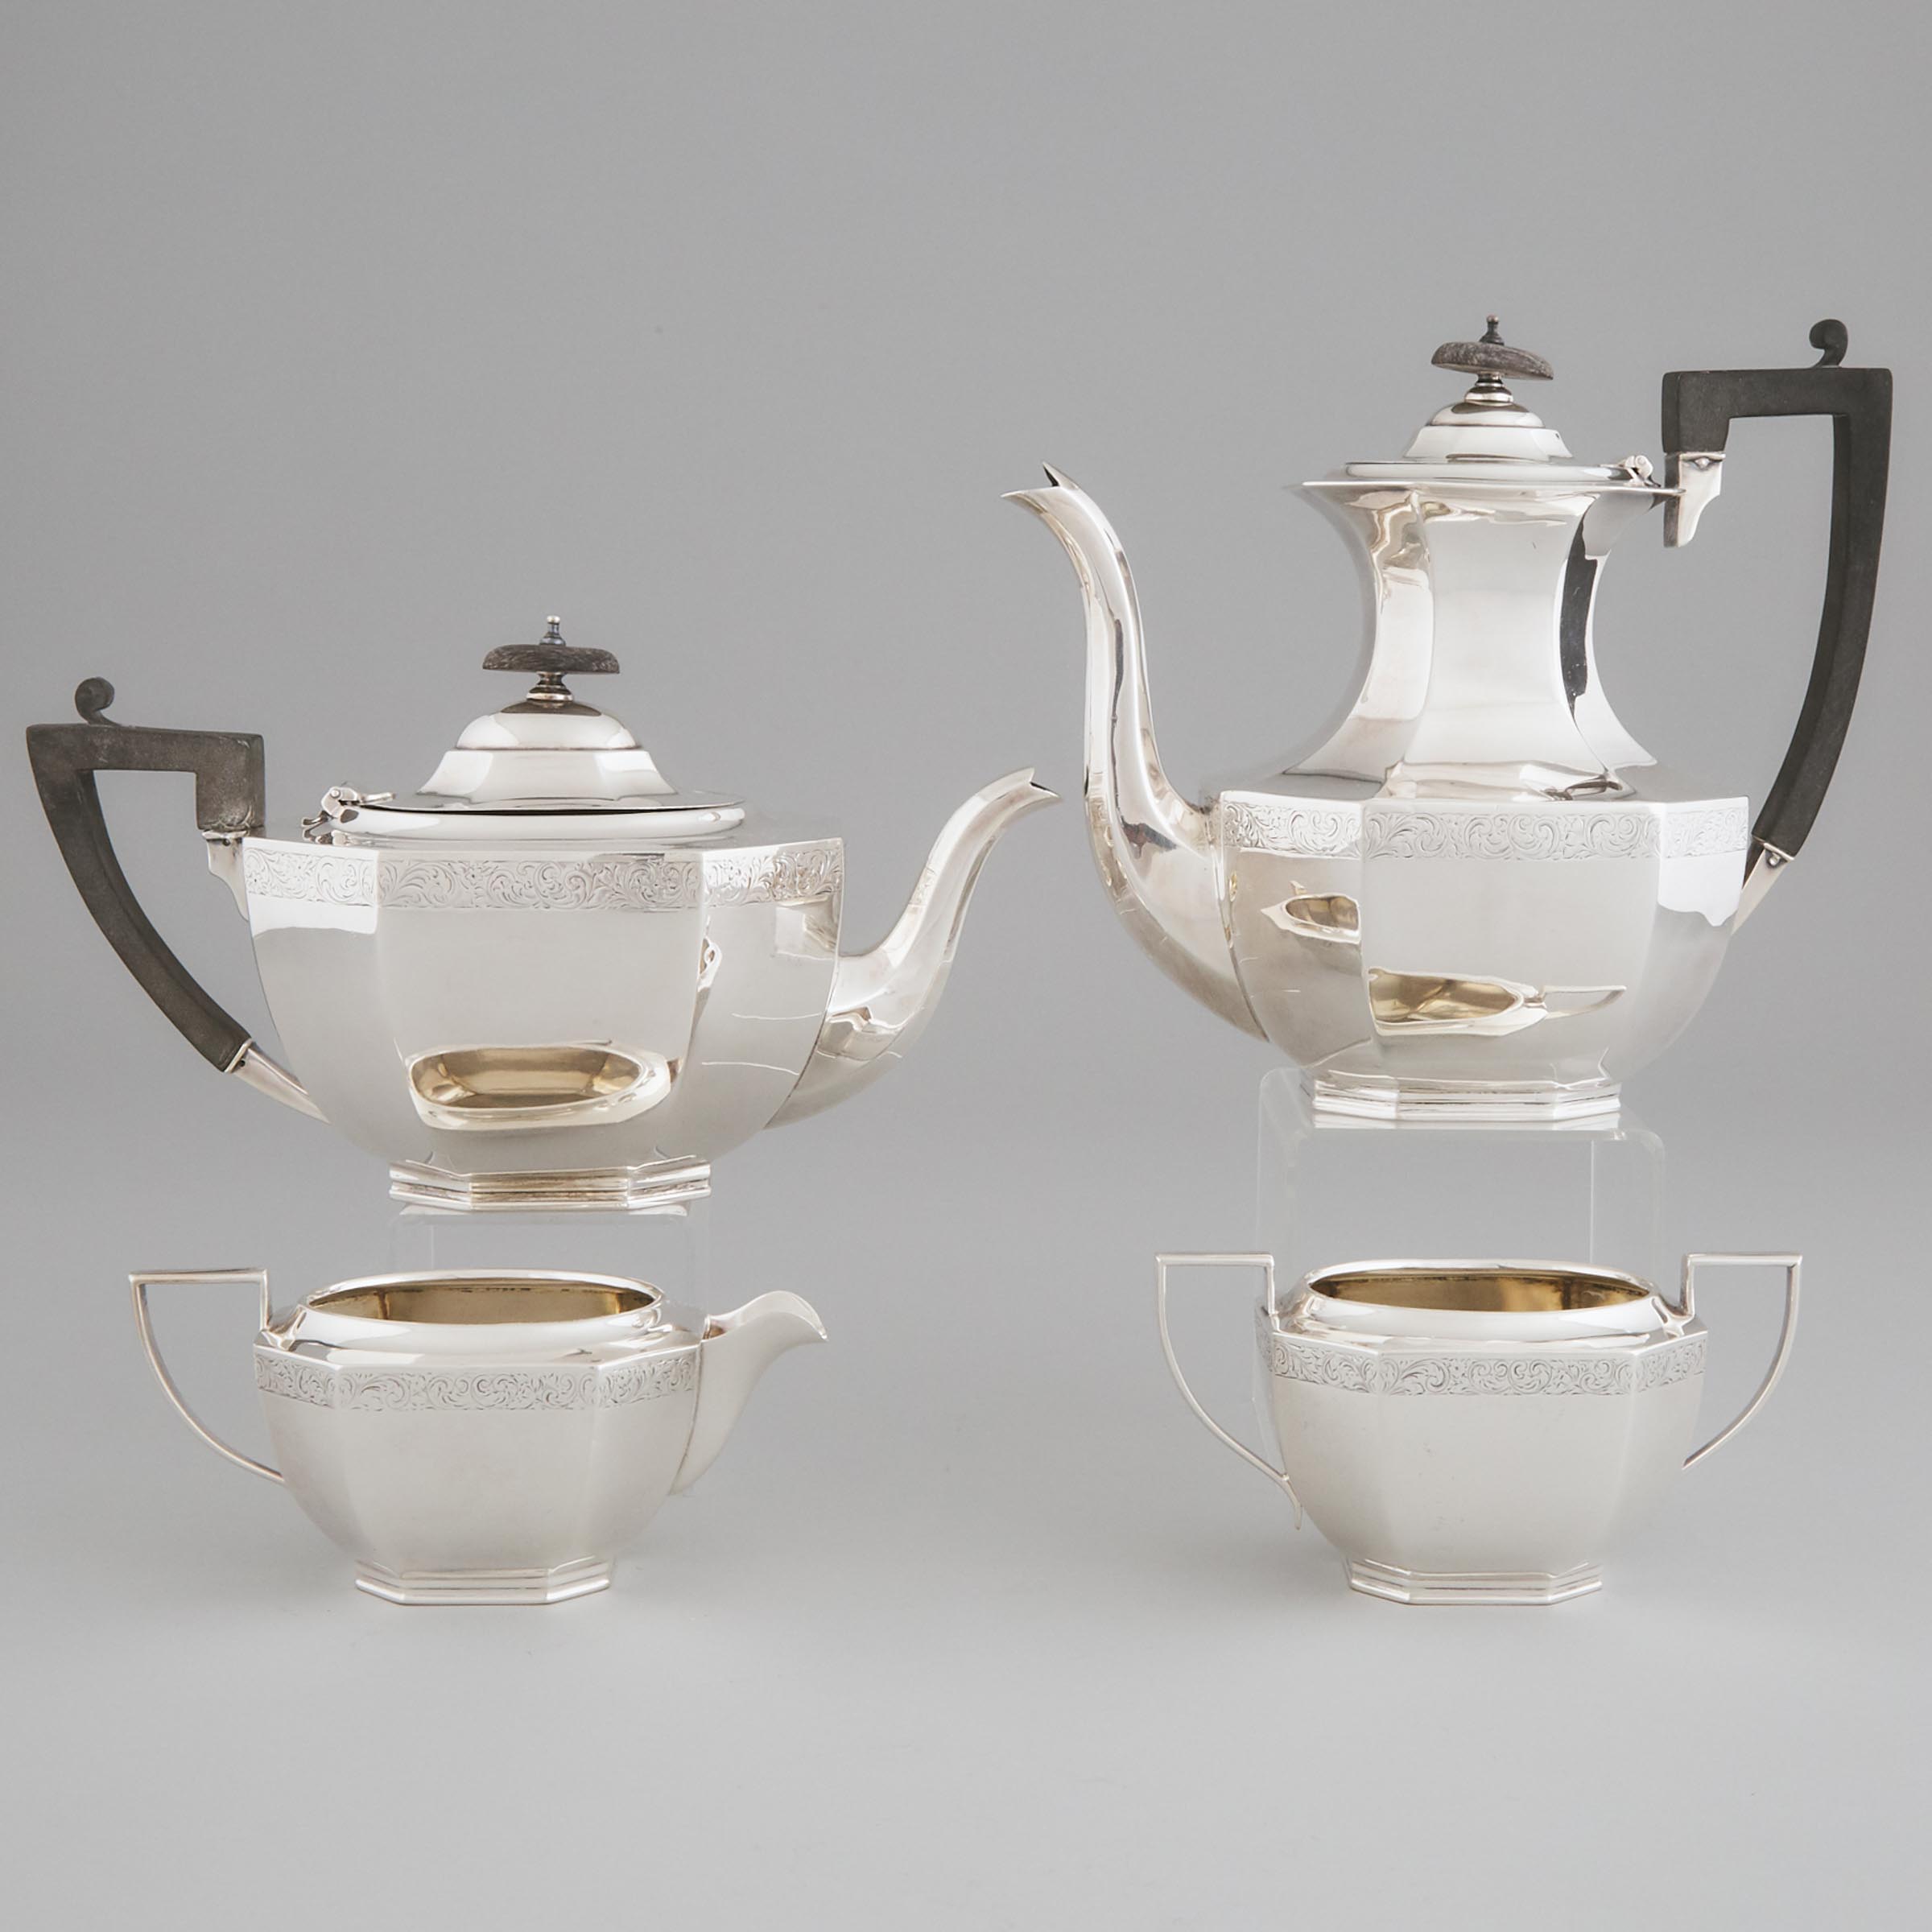 Canadian Silver Tea & Coffee Service, Henry Birks & Sons, Montreal, Que., 1904-24